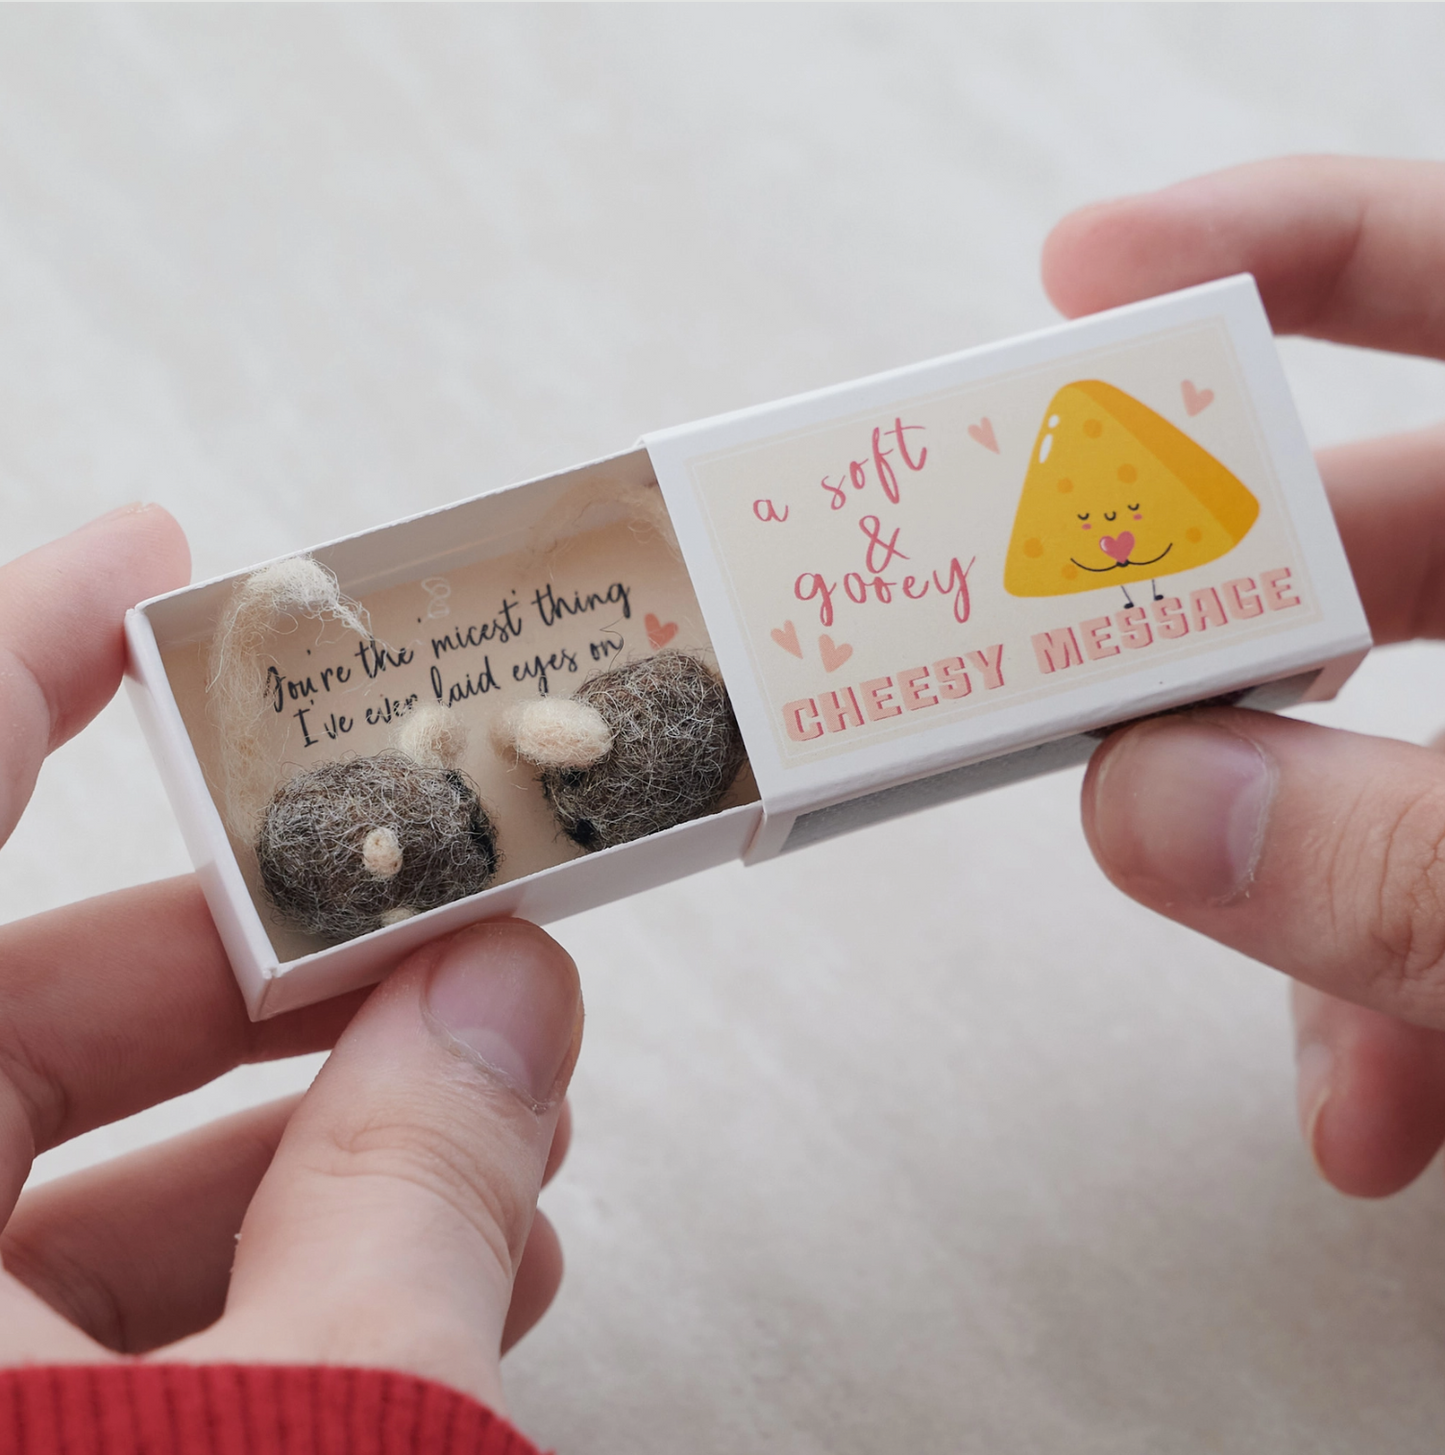 Load image into Gallery viewer, Cheesy Message in a Matchbox by Marvling Bros Ltd.
